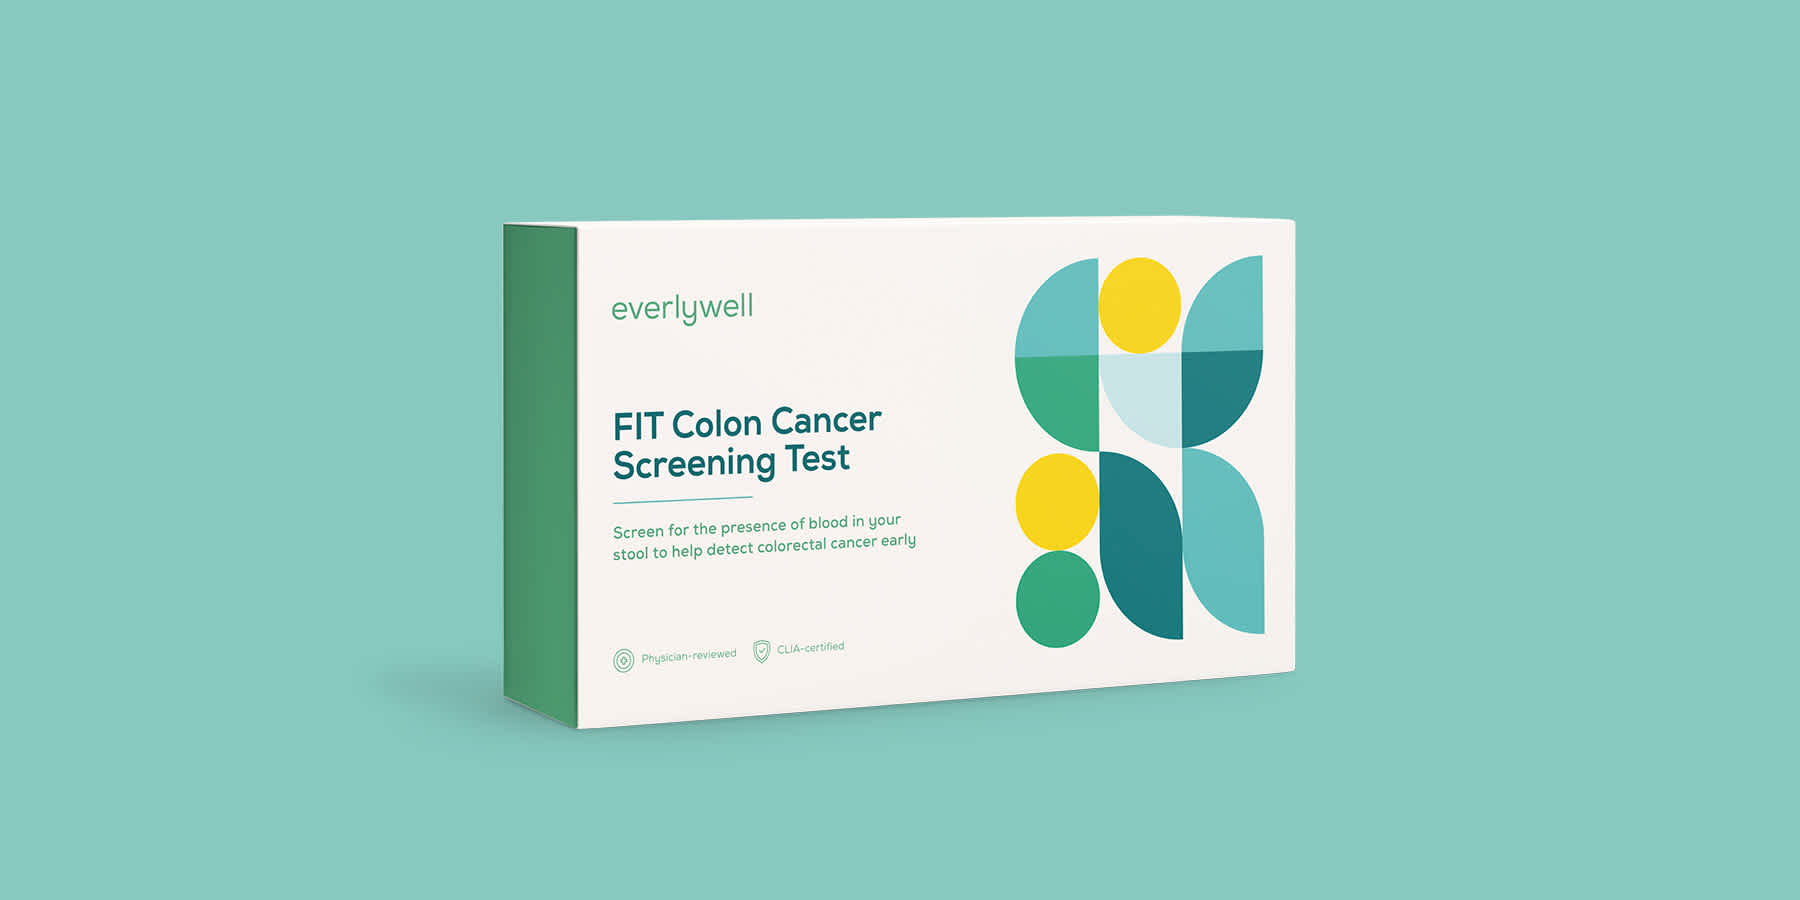 Image of Everlywell FIT Colon Cancer Screening Test against a light teal background